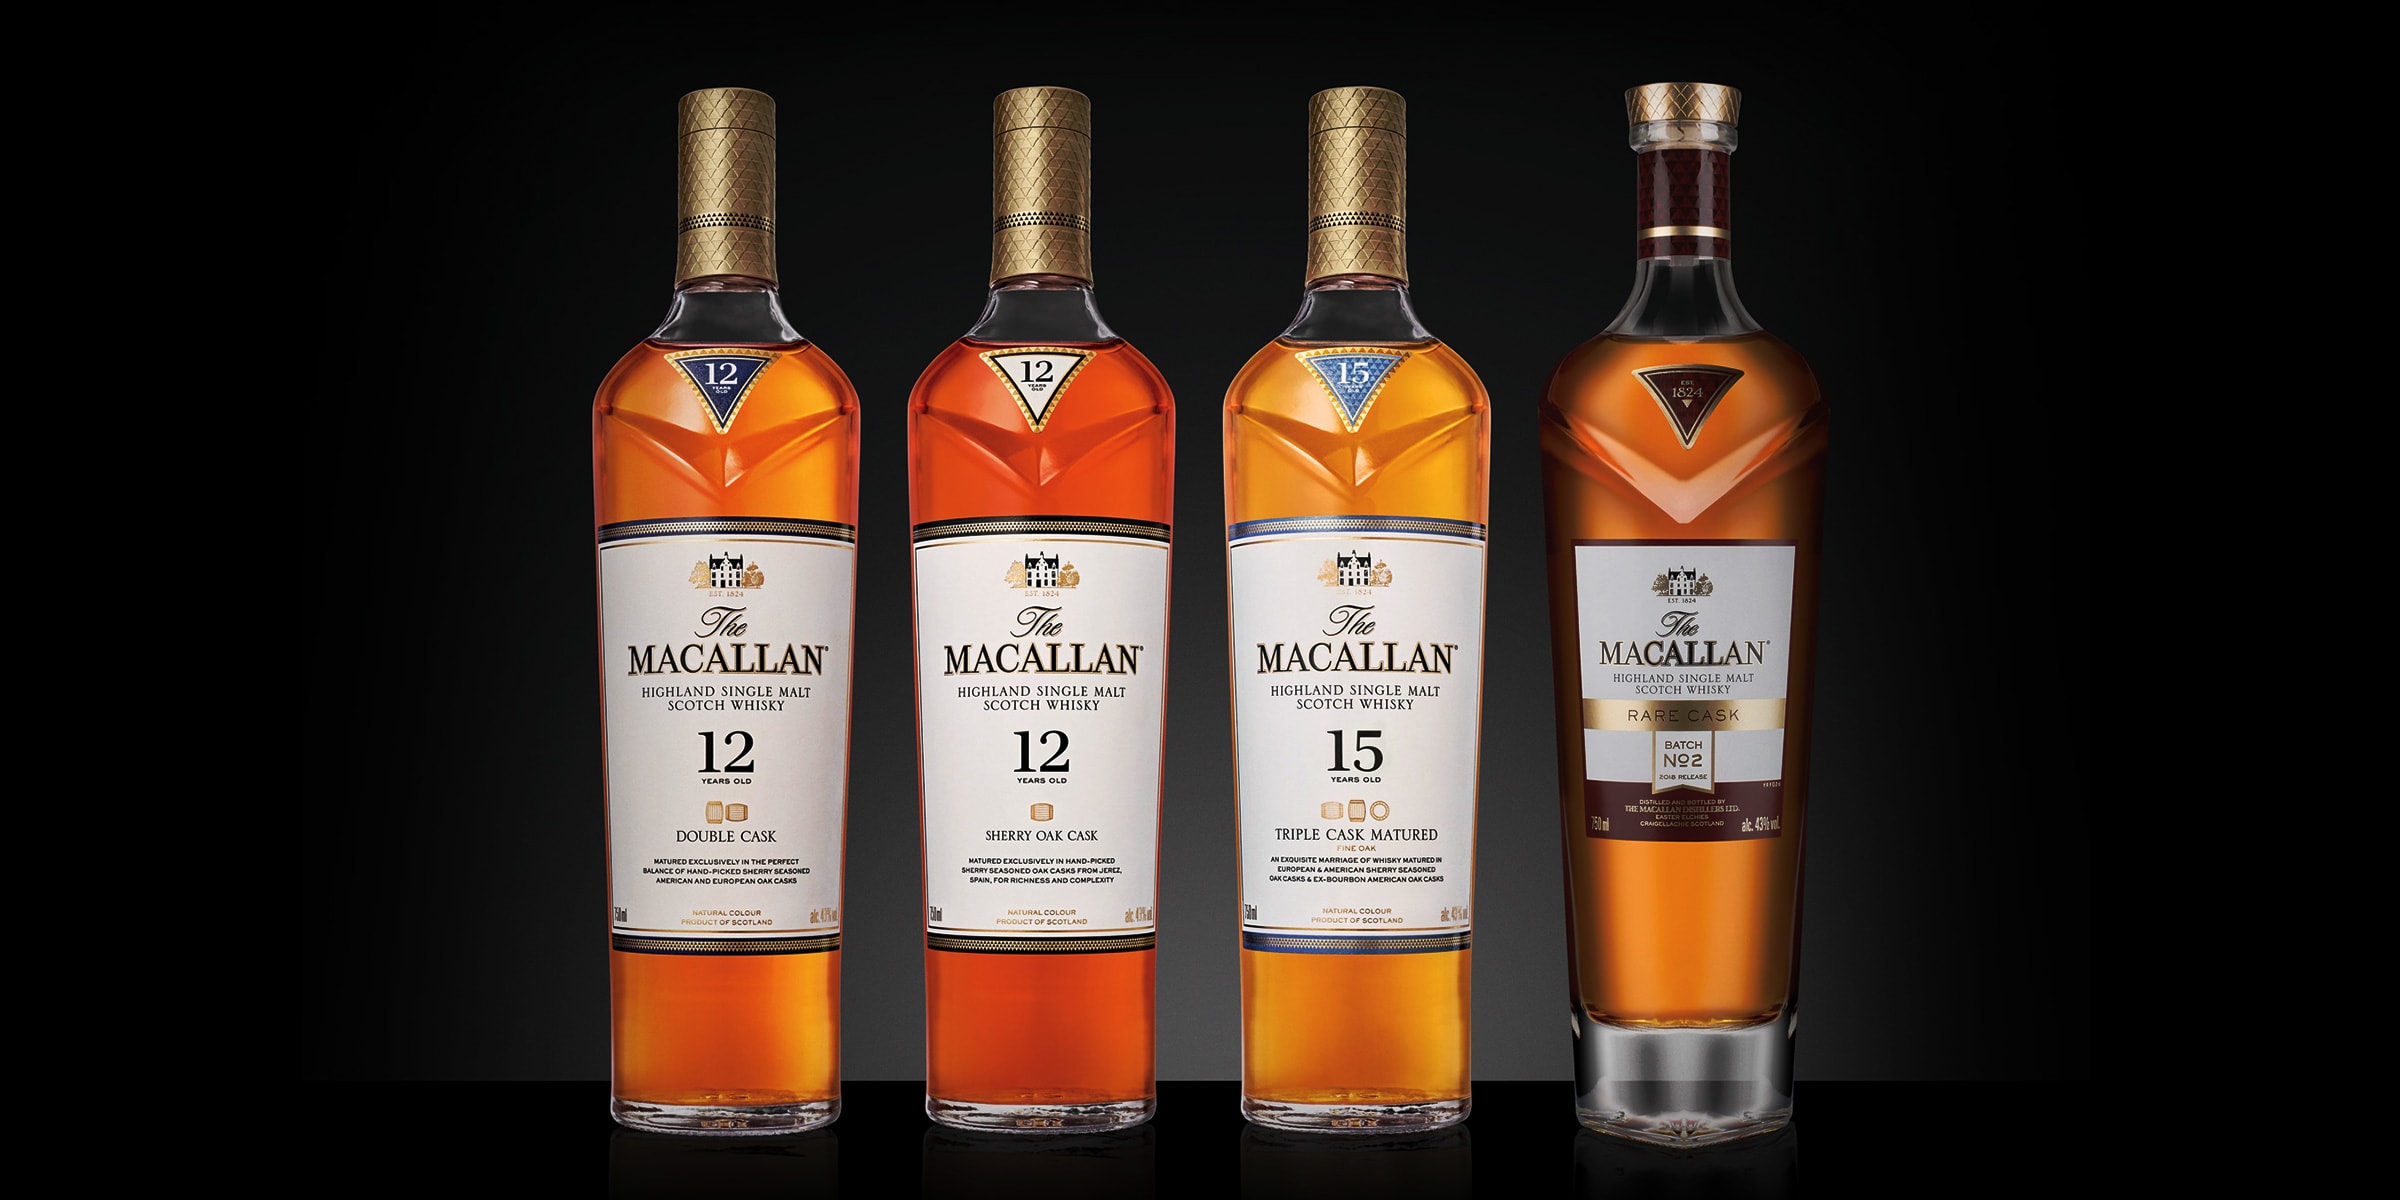 Macallan Price List Find The Perfect Bottle Of Whisky 2020 Guide